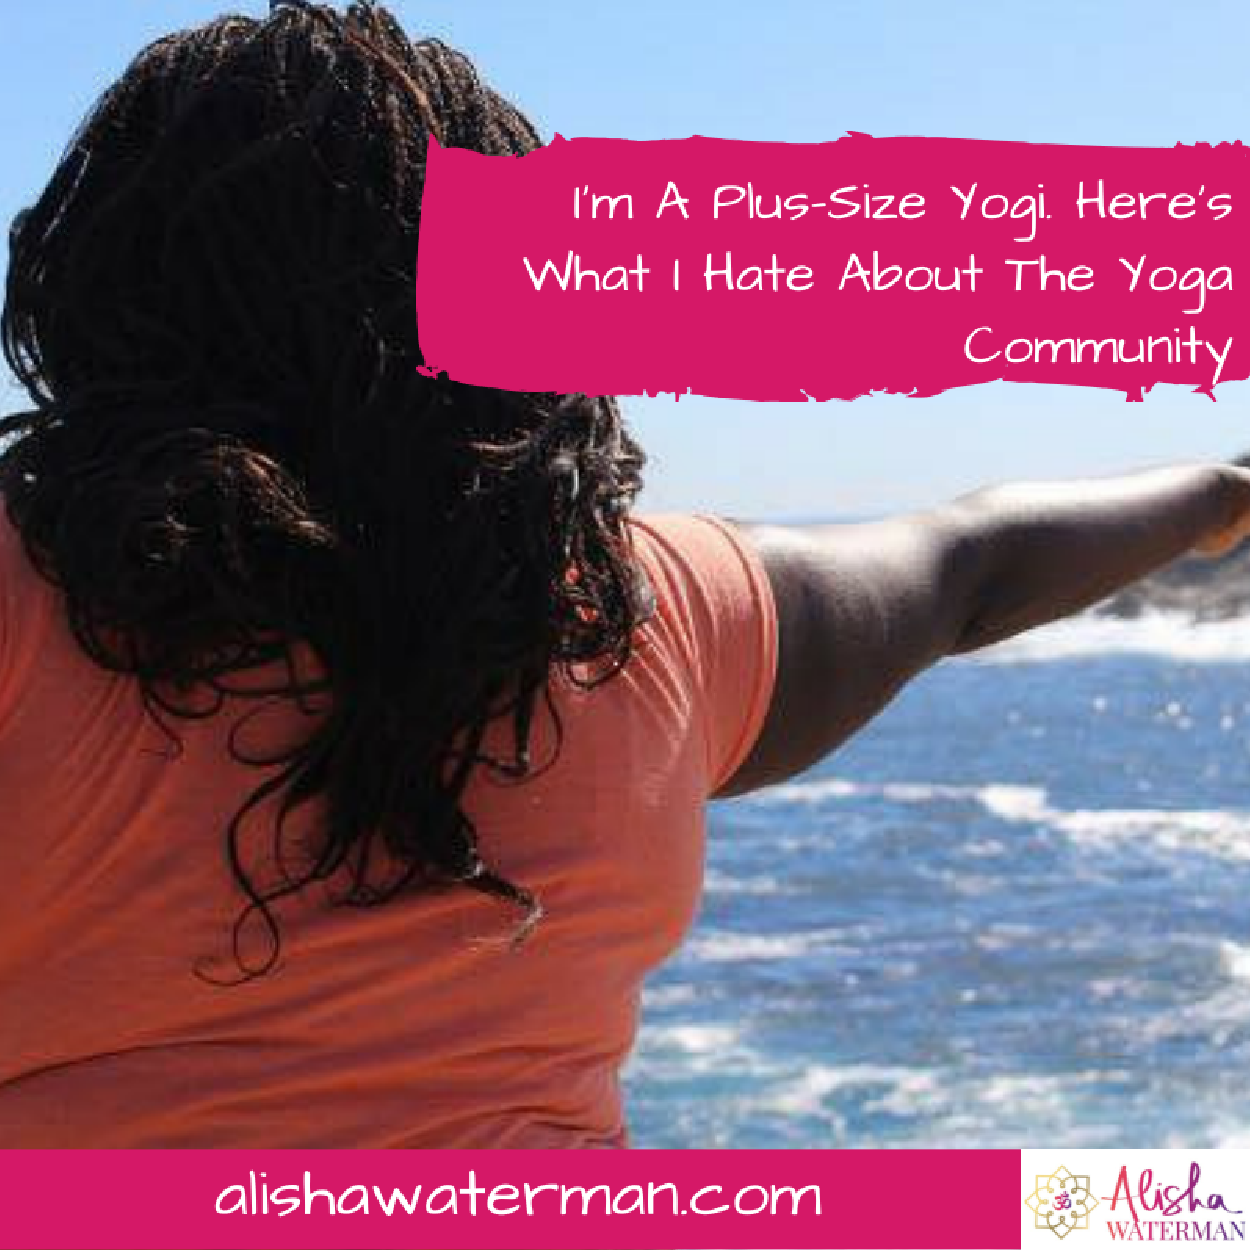 I’m A Plus-Size Yogi. Here’s What I Hate About The Yoga Community